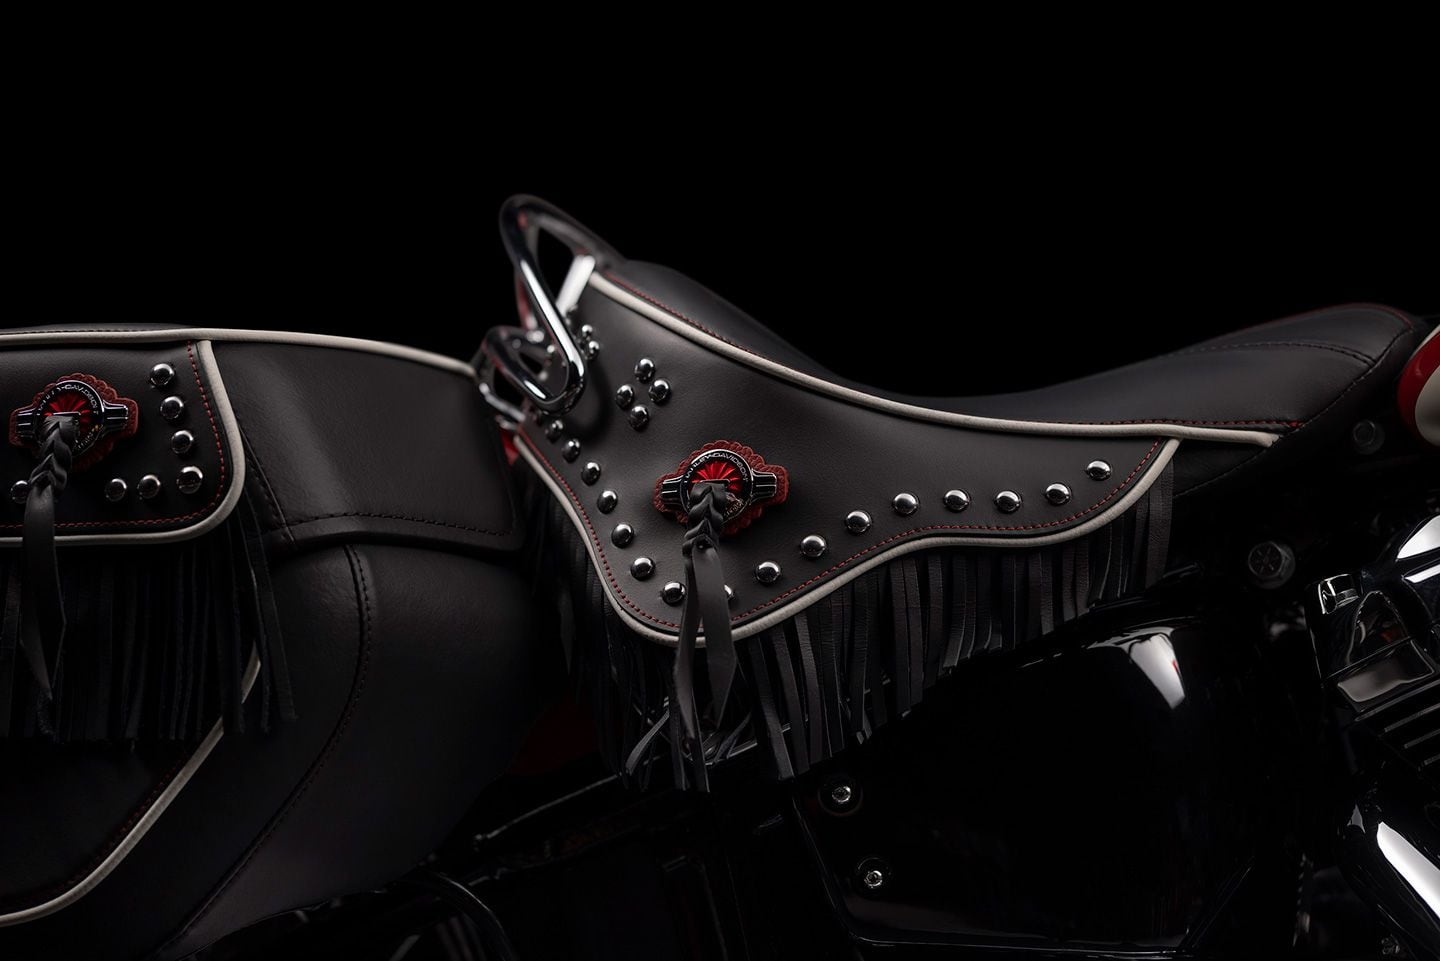 Solo saddle gets fringed and leathered, with white piping, red stitching, and chrome rail for a vintage look.